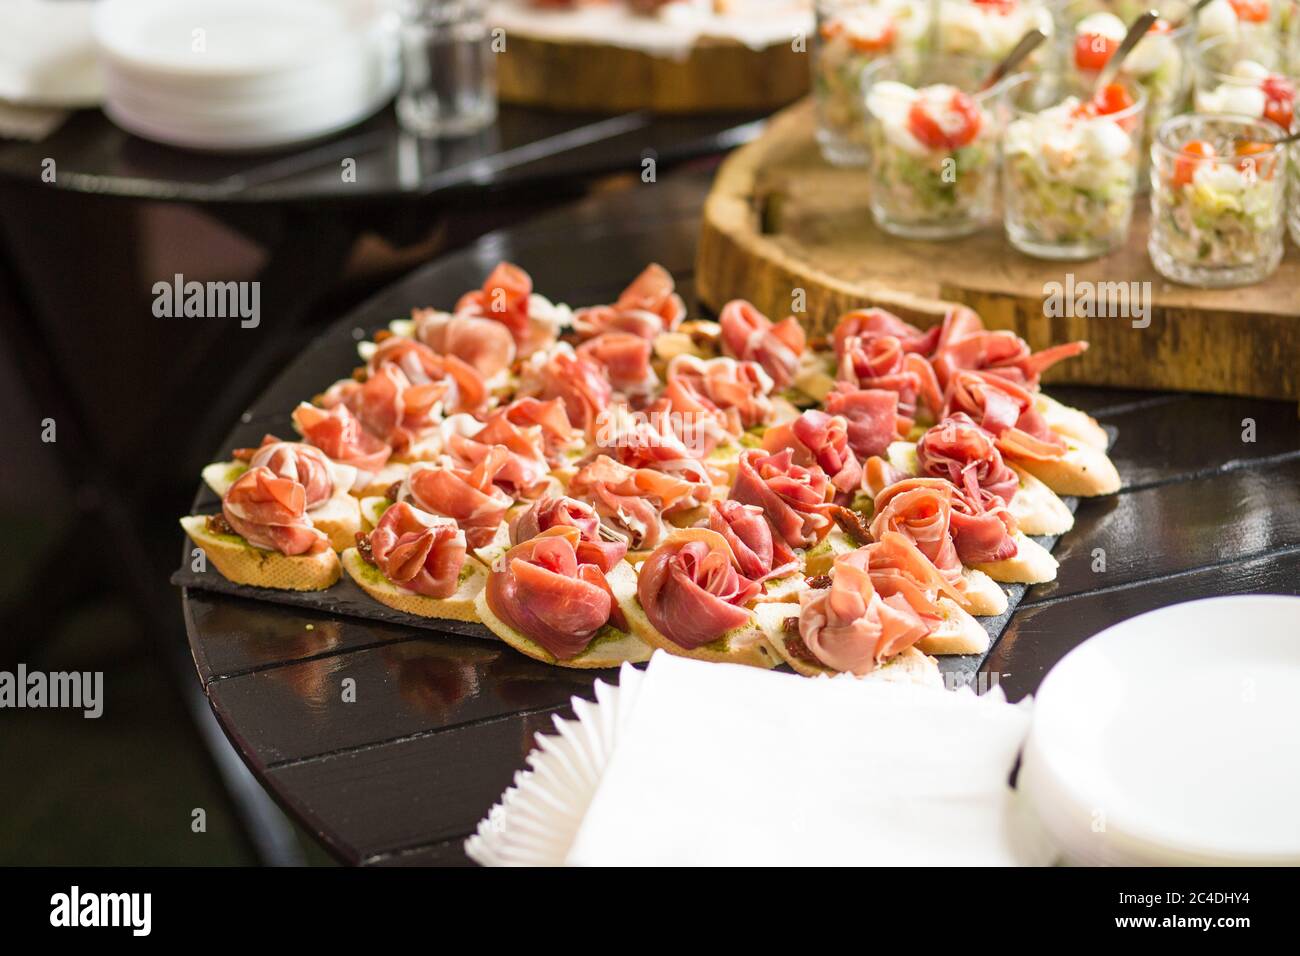 Many sandwiches with jamon and sauce on dark wooden table. Lot of bruschettas with ham or parma. Snack baguette with meat. Catering food concept Stock Photo